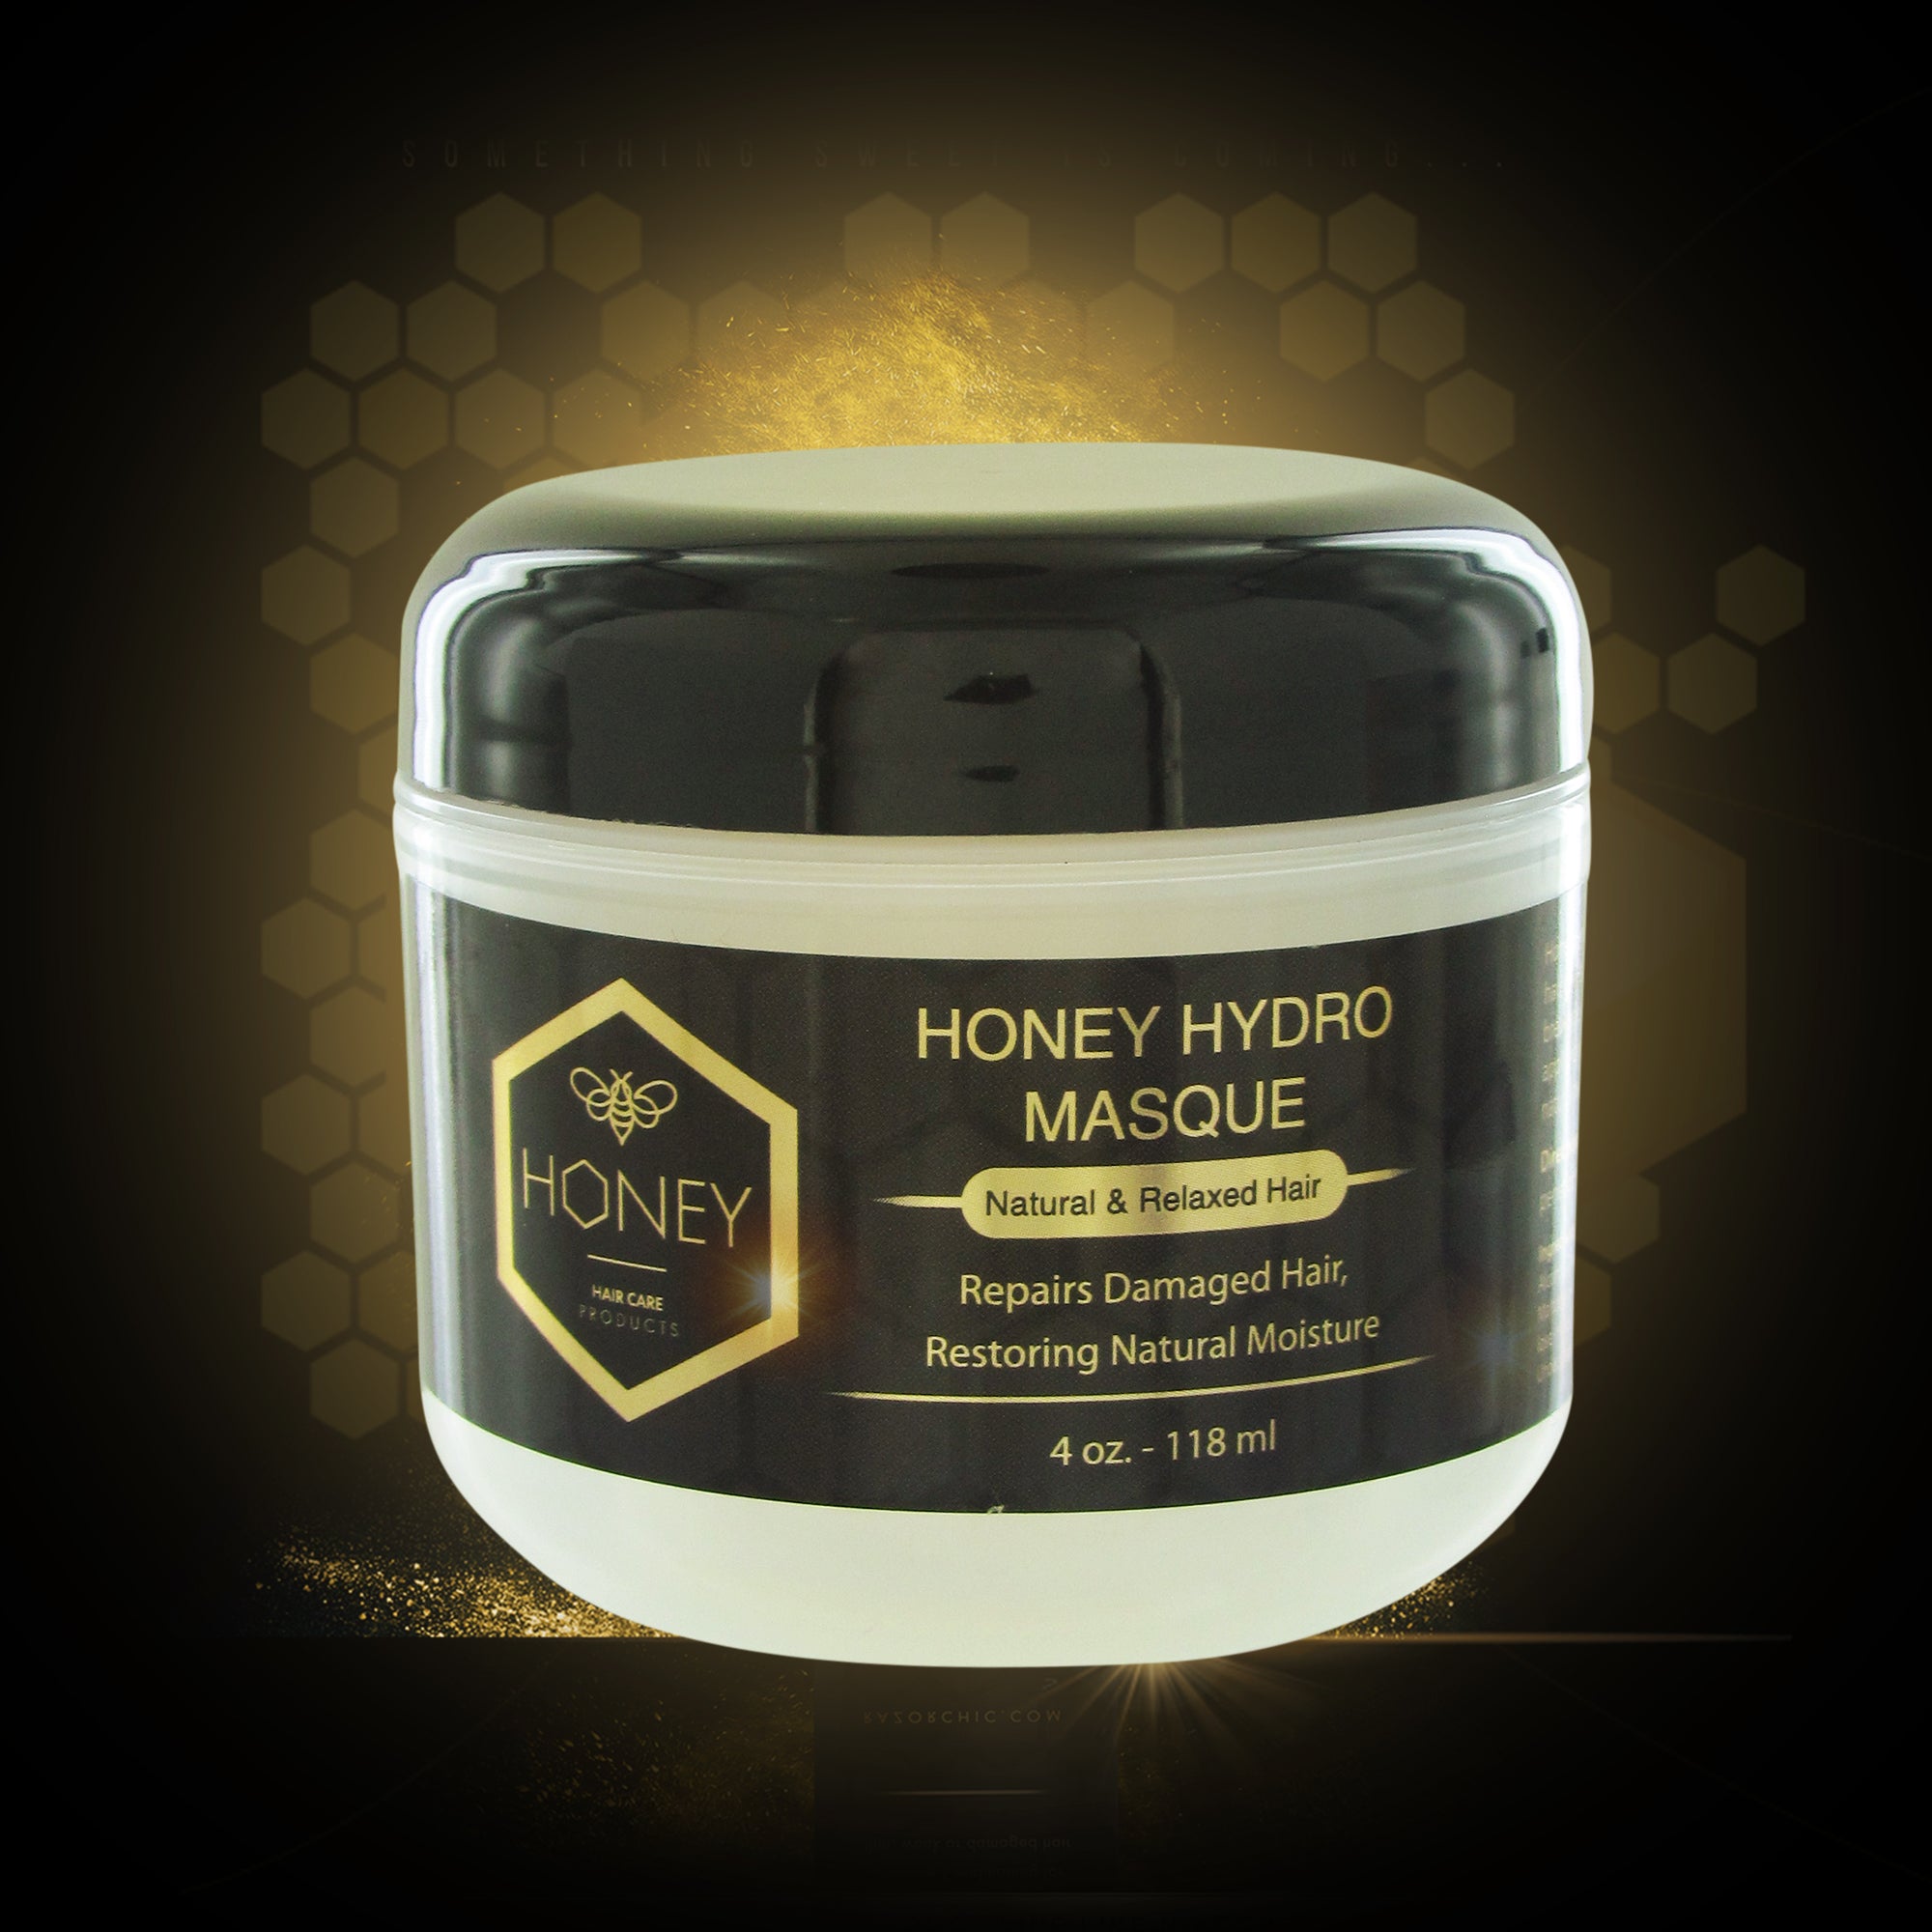 Honey Hydro Masque (4oz) for Dry Damaged Hair - Helps Repair Damaged Hair, Split Ends, Hair Loss and Breakage